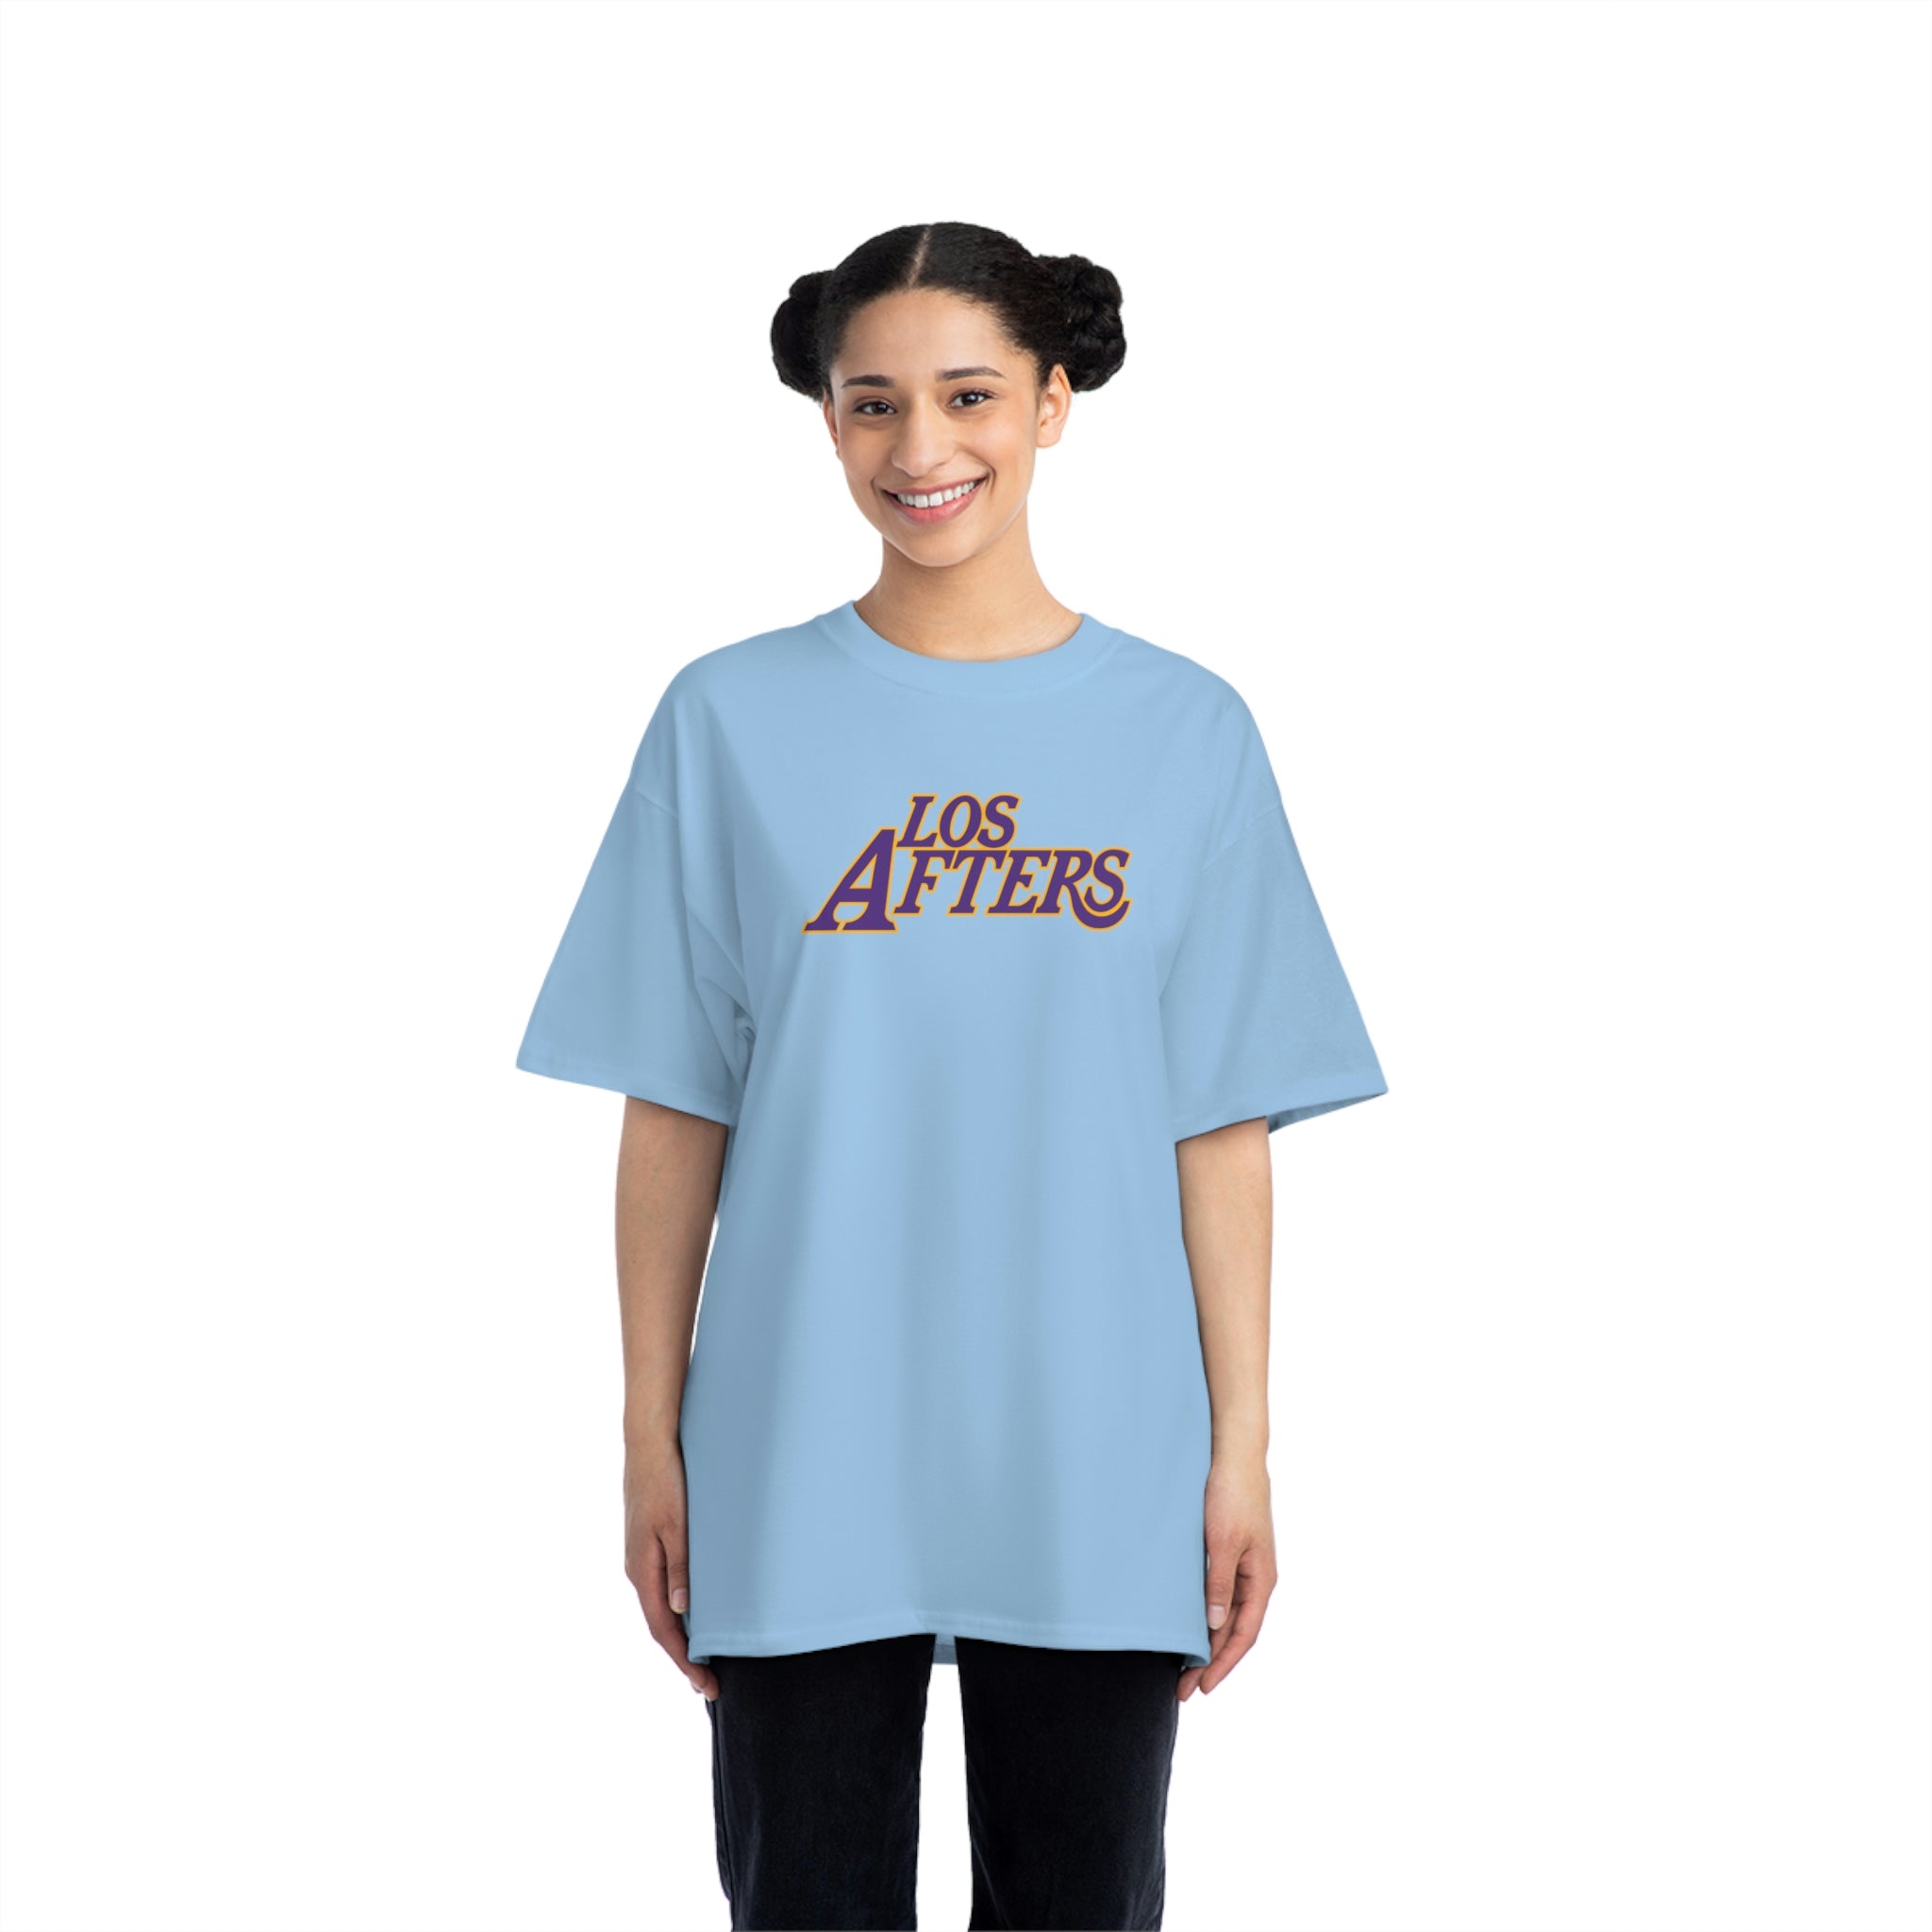 Los Afters Lakers Tee